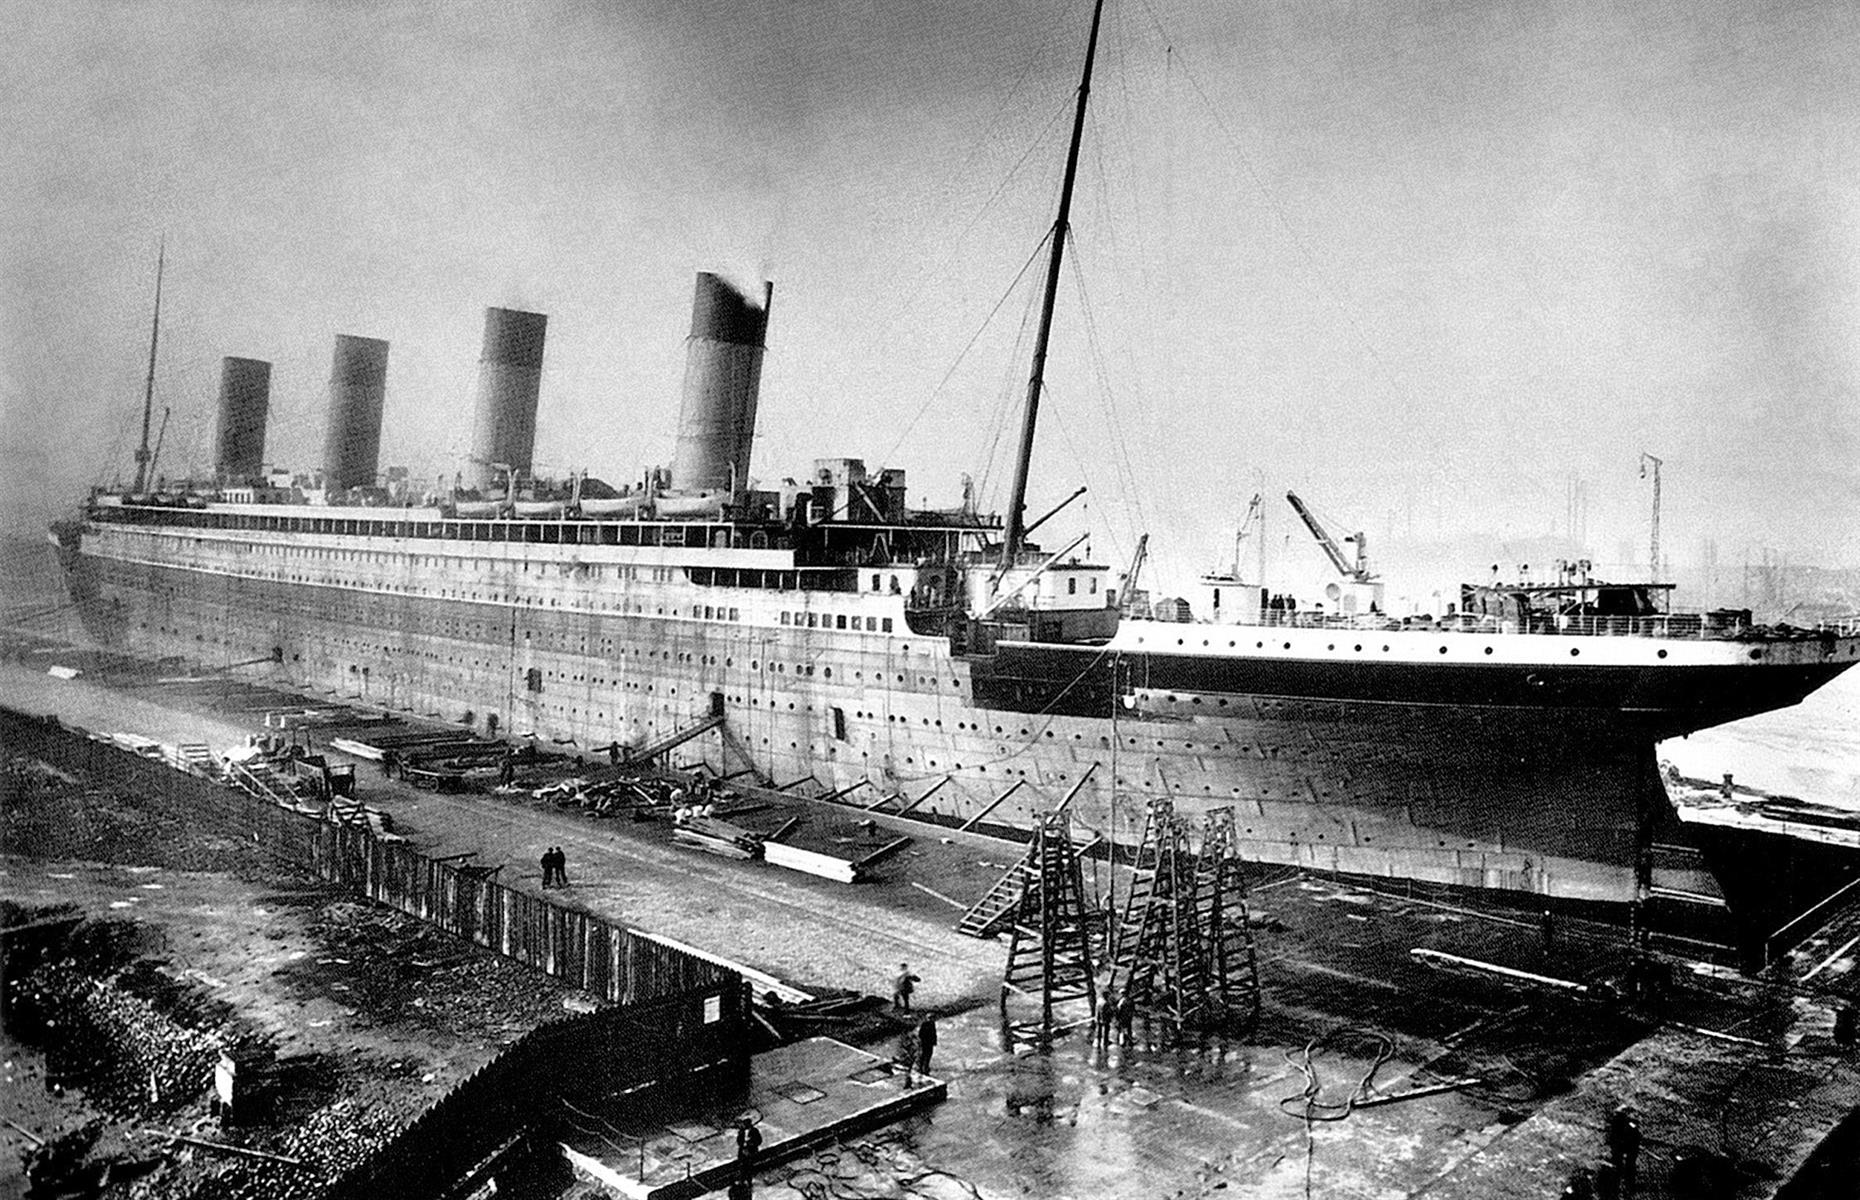 Inside Titanic – step back in time with the 'Ship of Dreams'